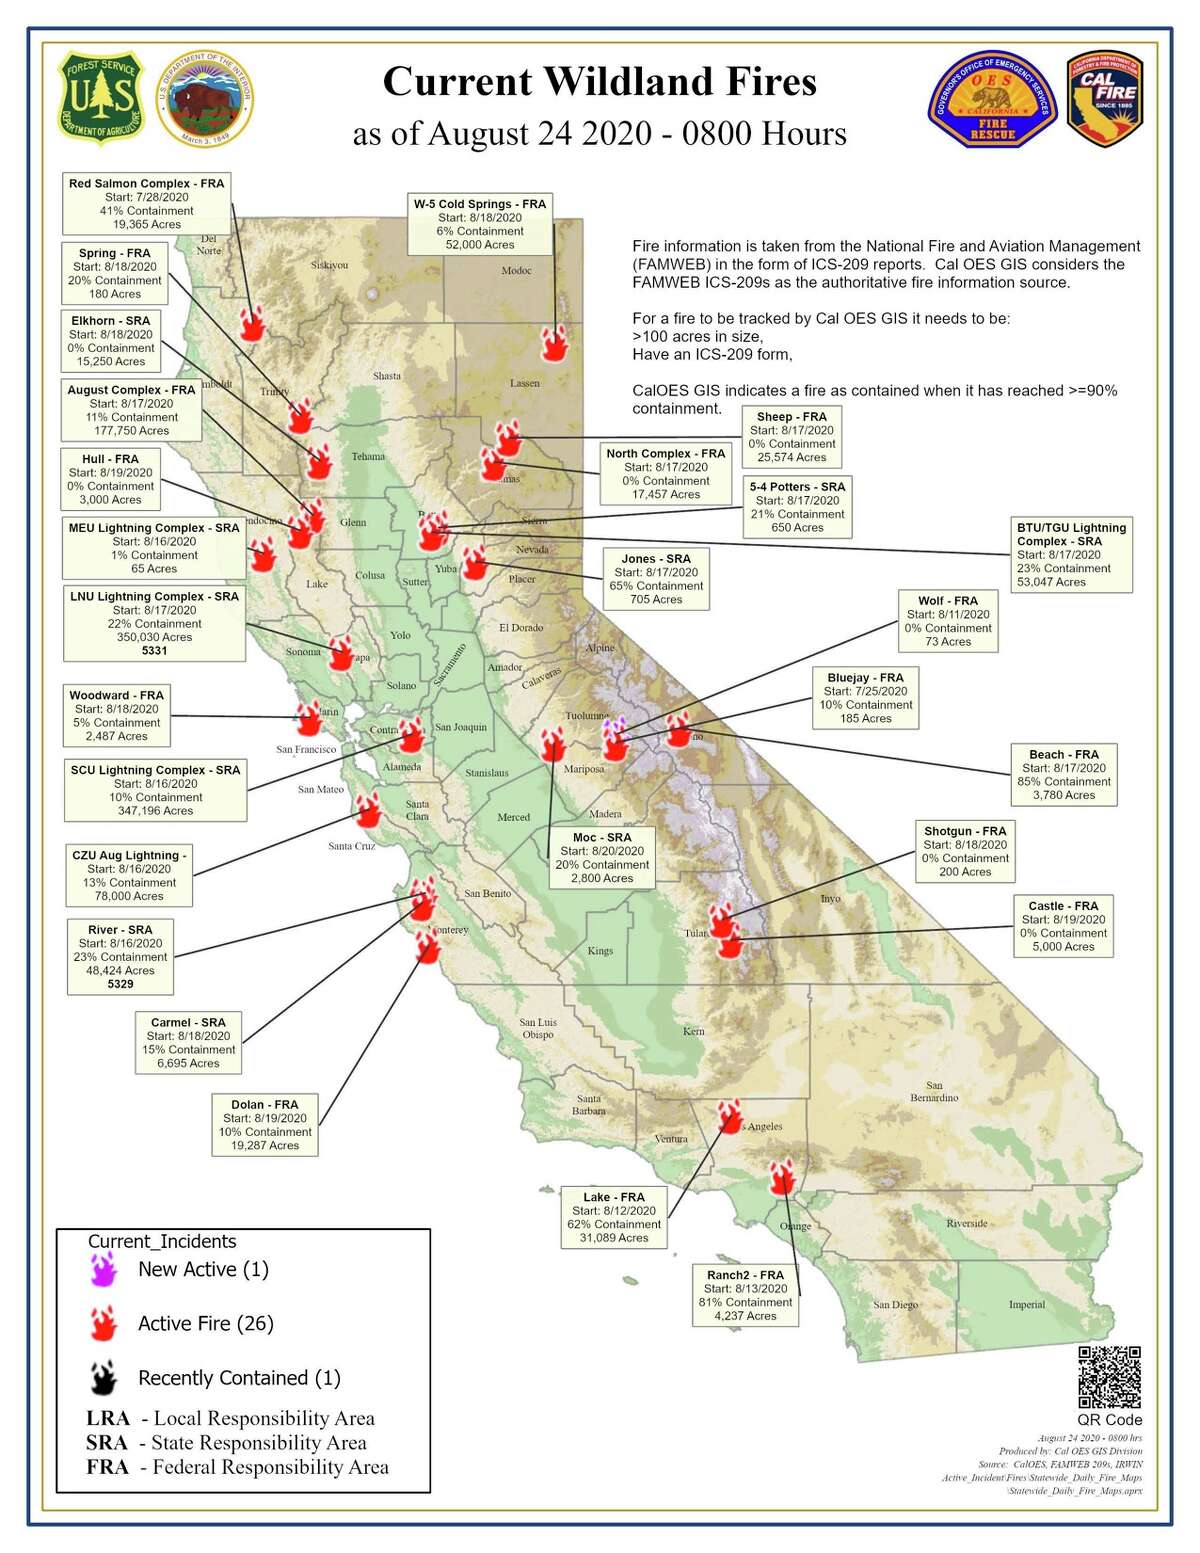 Cal OES released this map of where the state is currently fighting wildfires in California as of August 24, 2002.